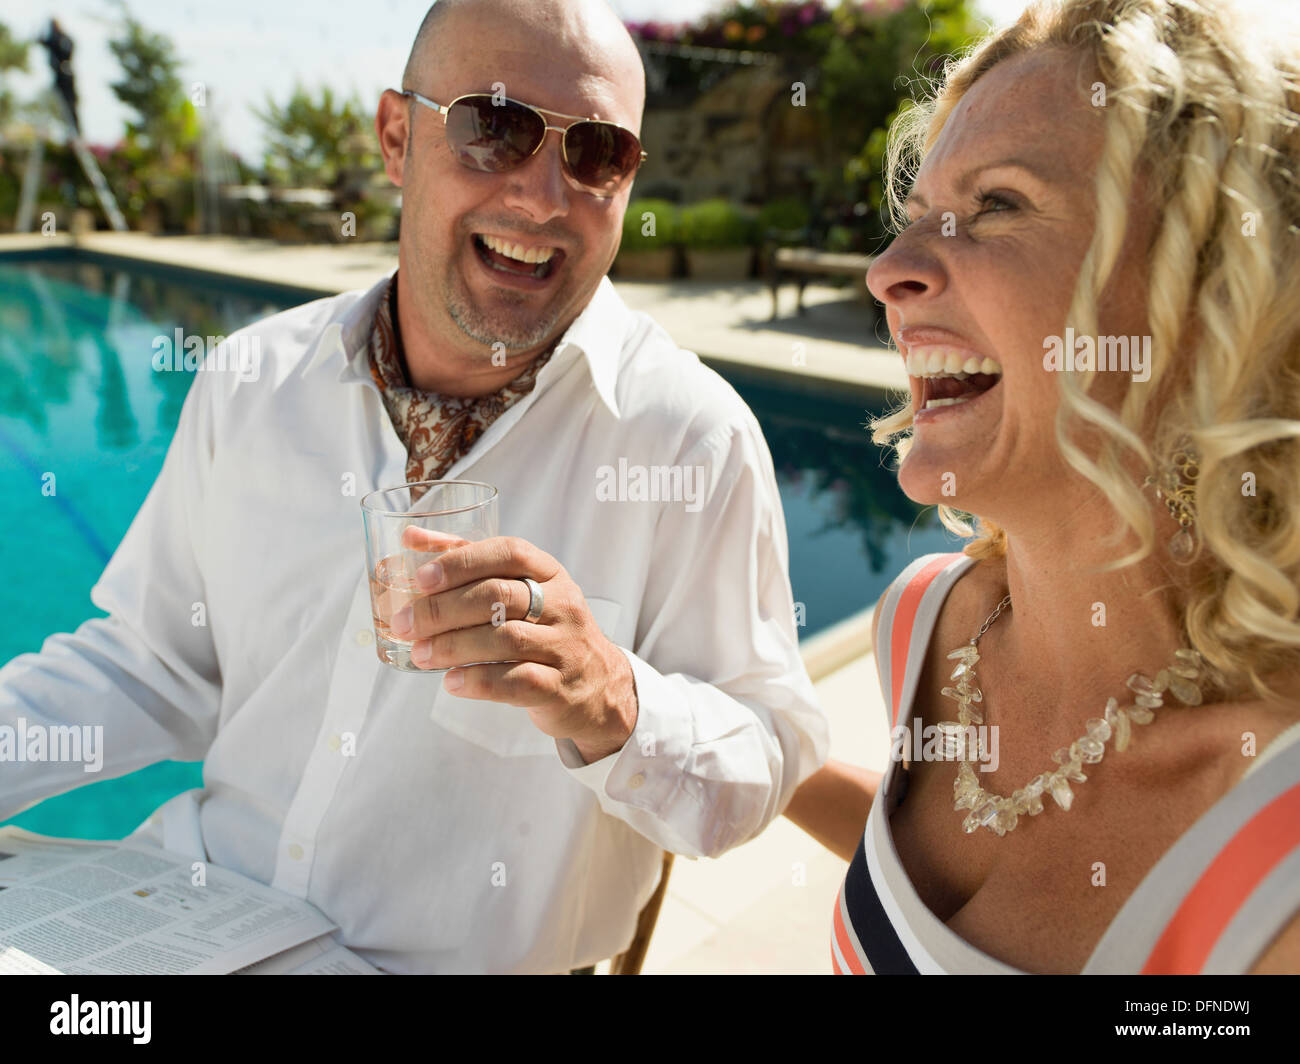 A Young man enjoys his drink with a beautiful woman by the side of a swimming pool in San Diego. Stock Photo